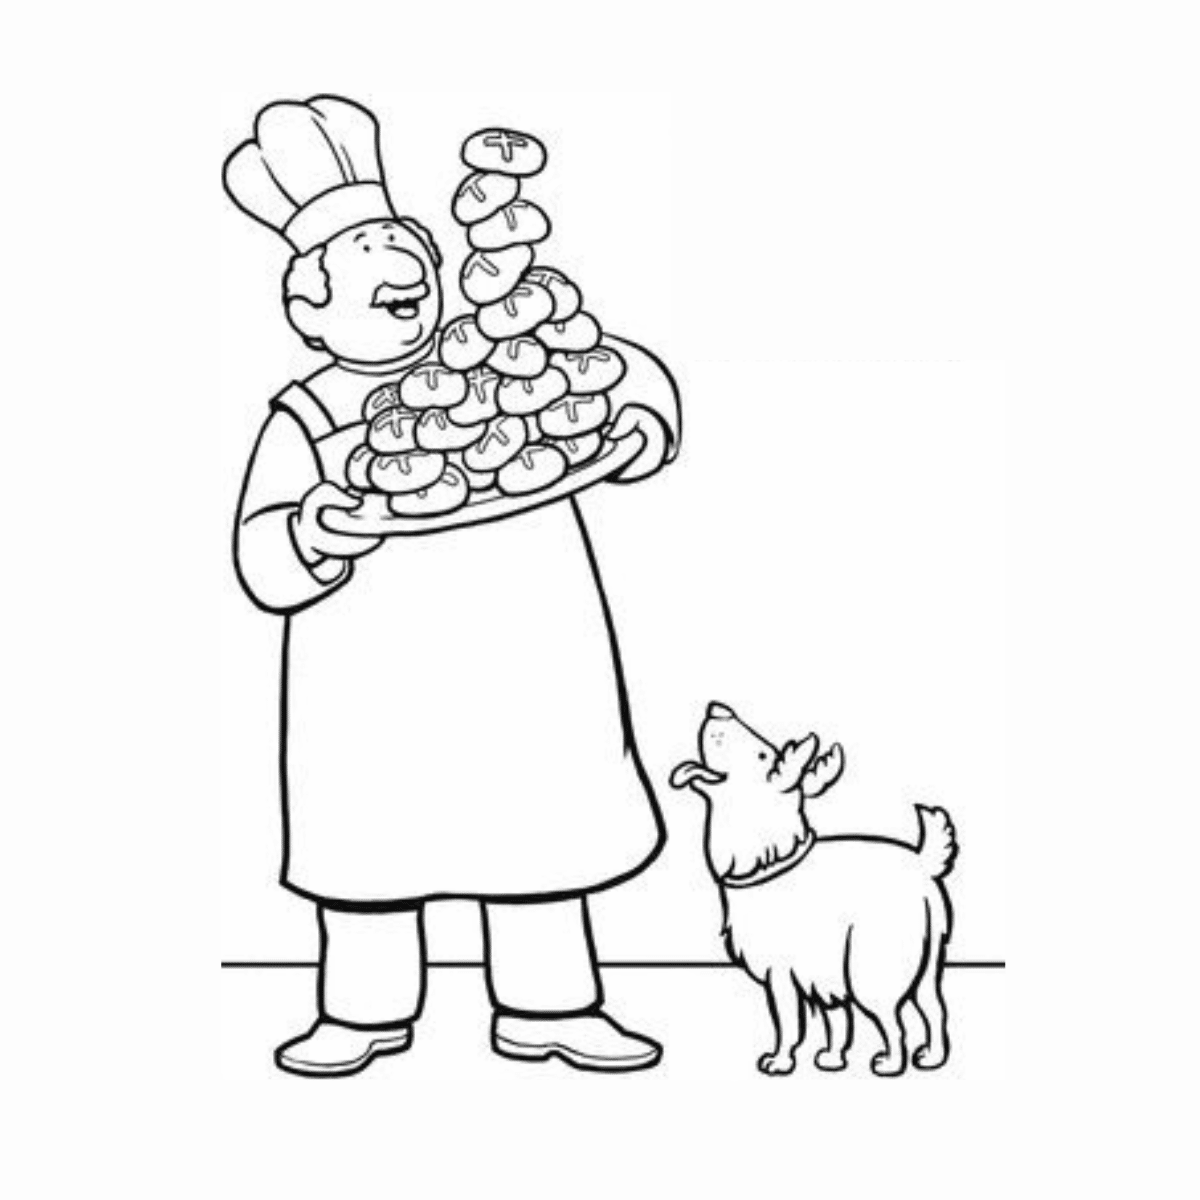 Hot Cross Buns coloring page